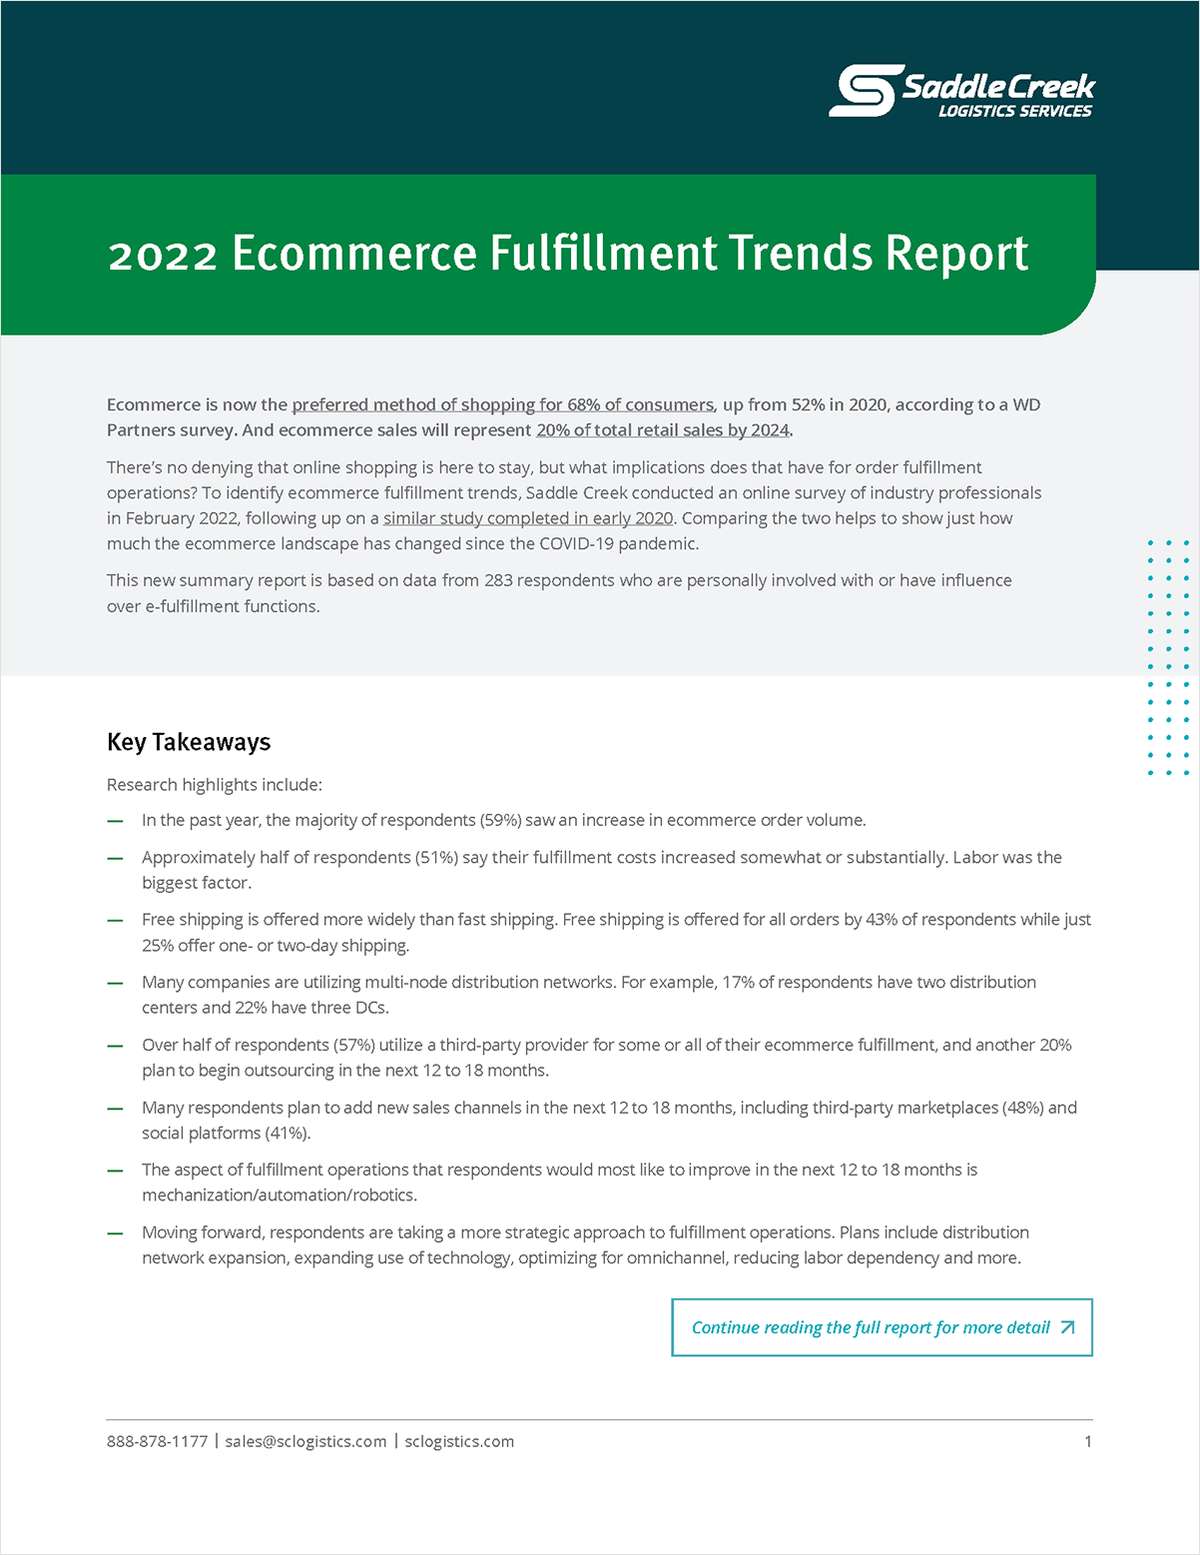 What to Expect in 2022: Ecommerce Fulfillment Trends Report